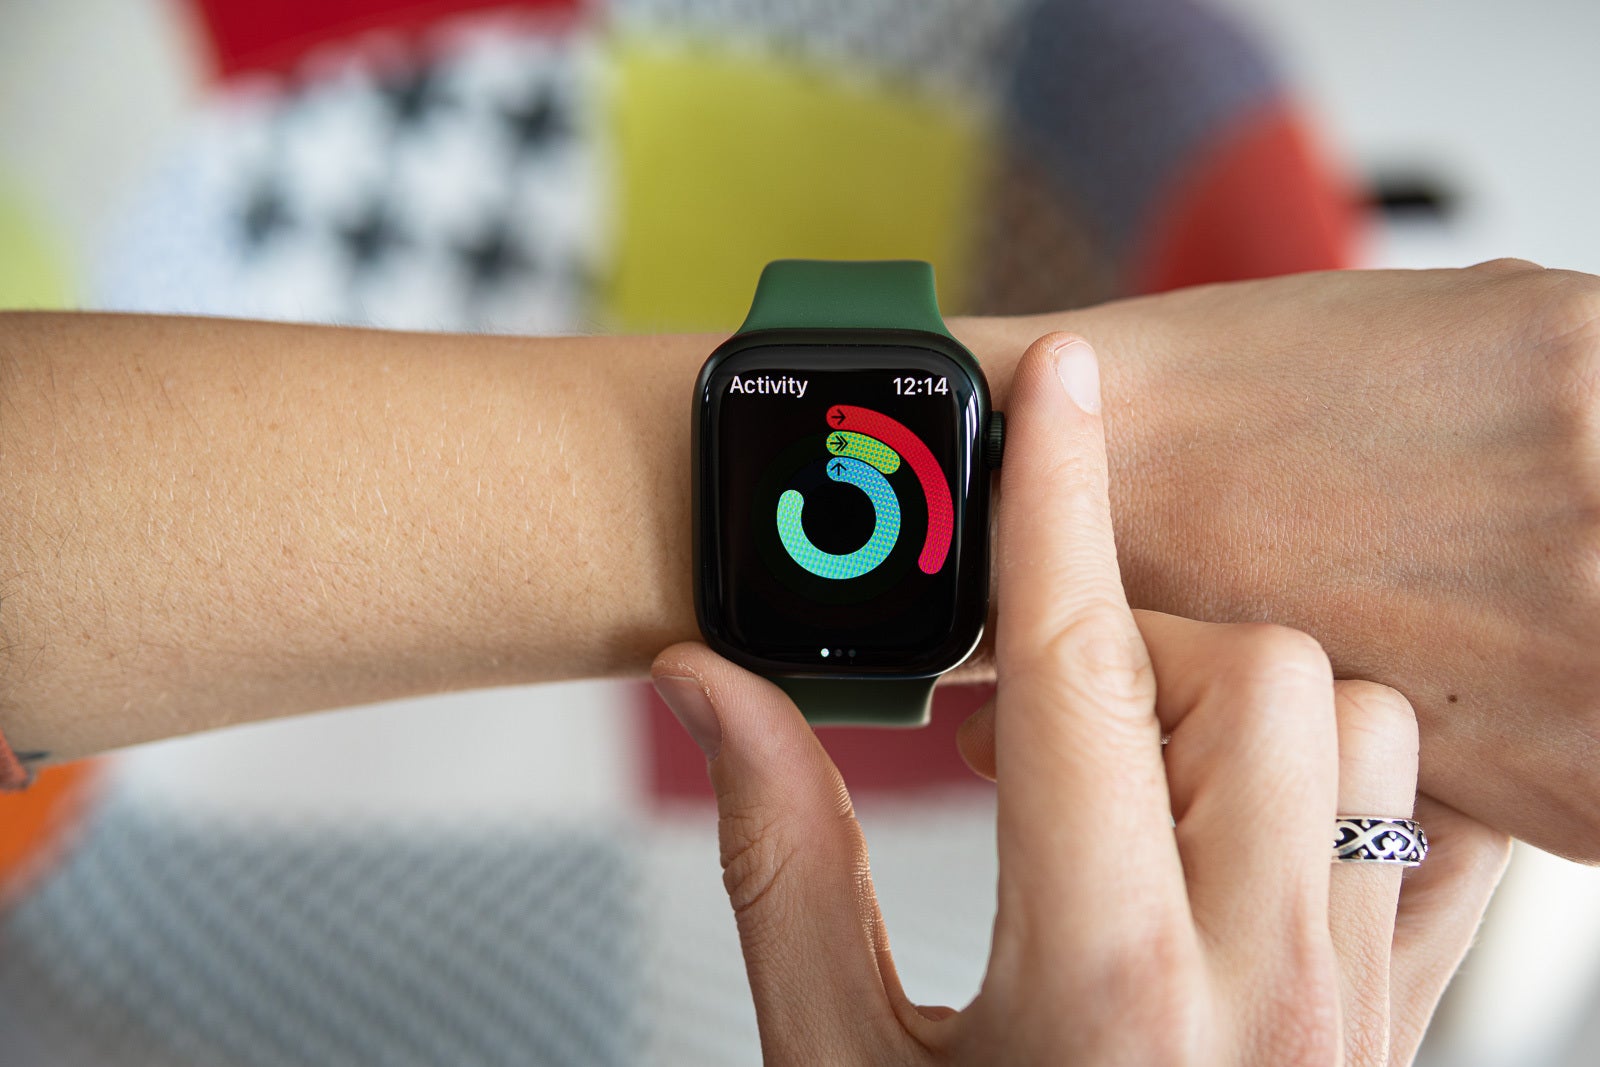 Apple Watch Series 7 activity rings - Apple Watch Series 7 Review